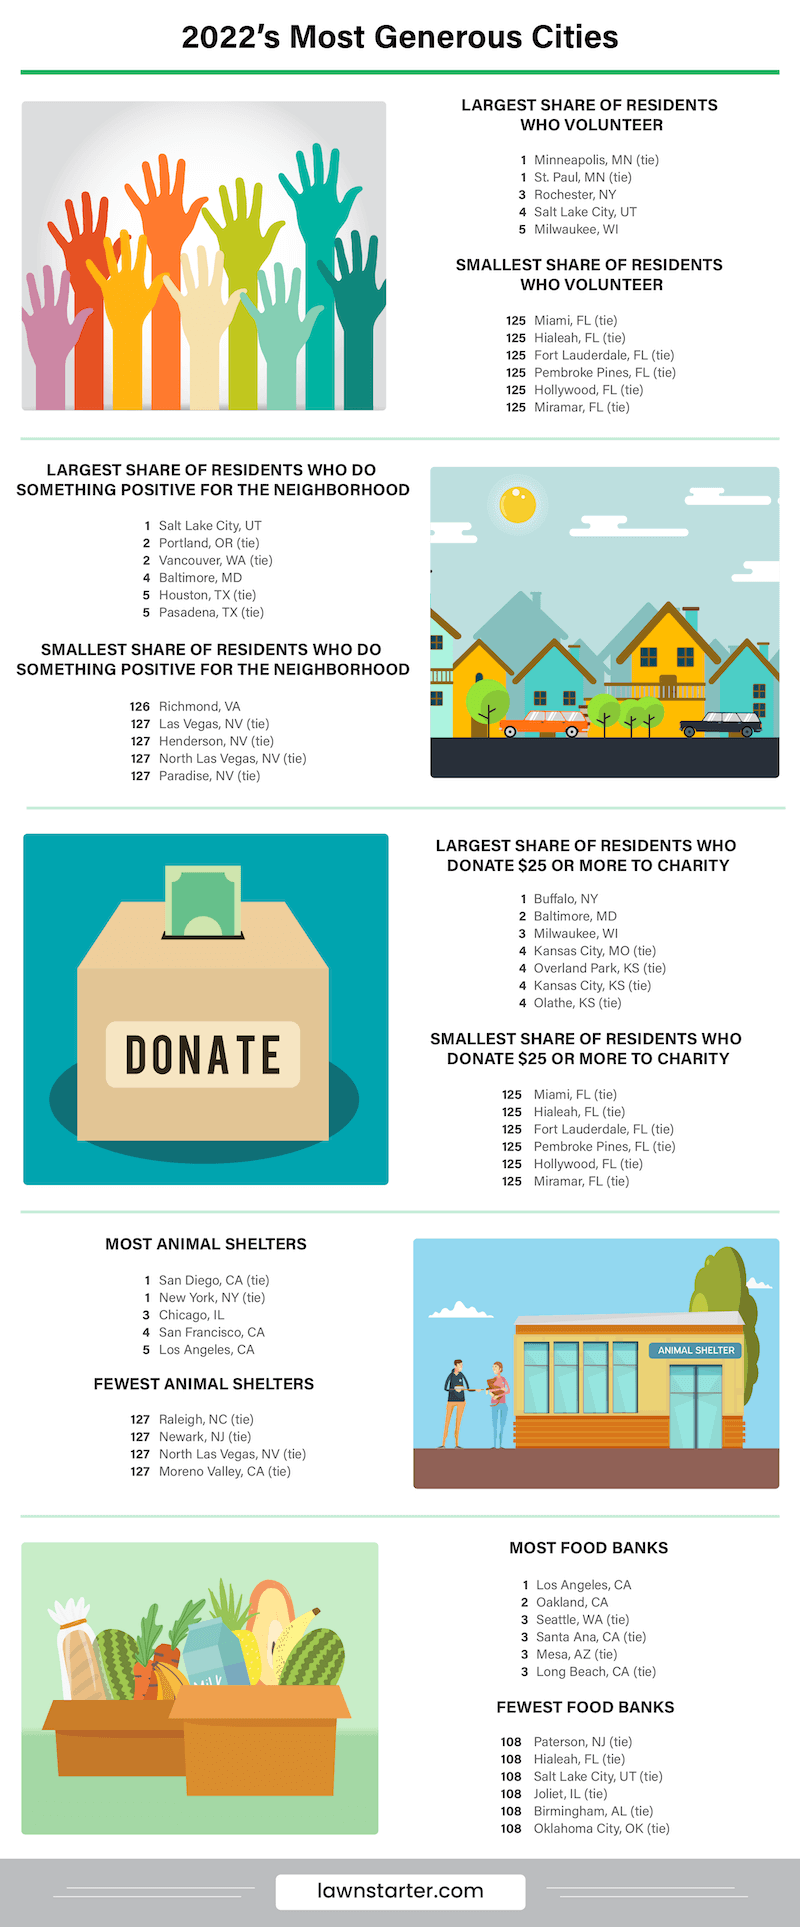 Infographic showing the most generous cities, a ranking based on volunteering rates, food banks, homeless shelters, and more